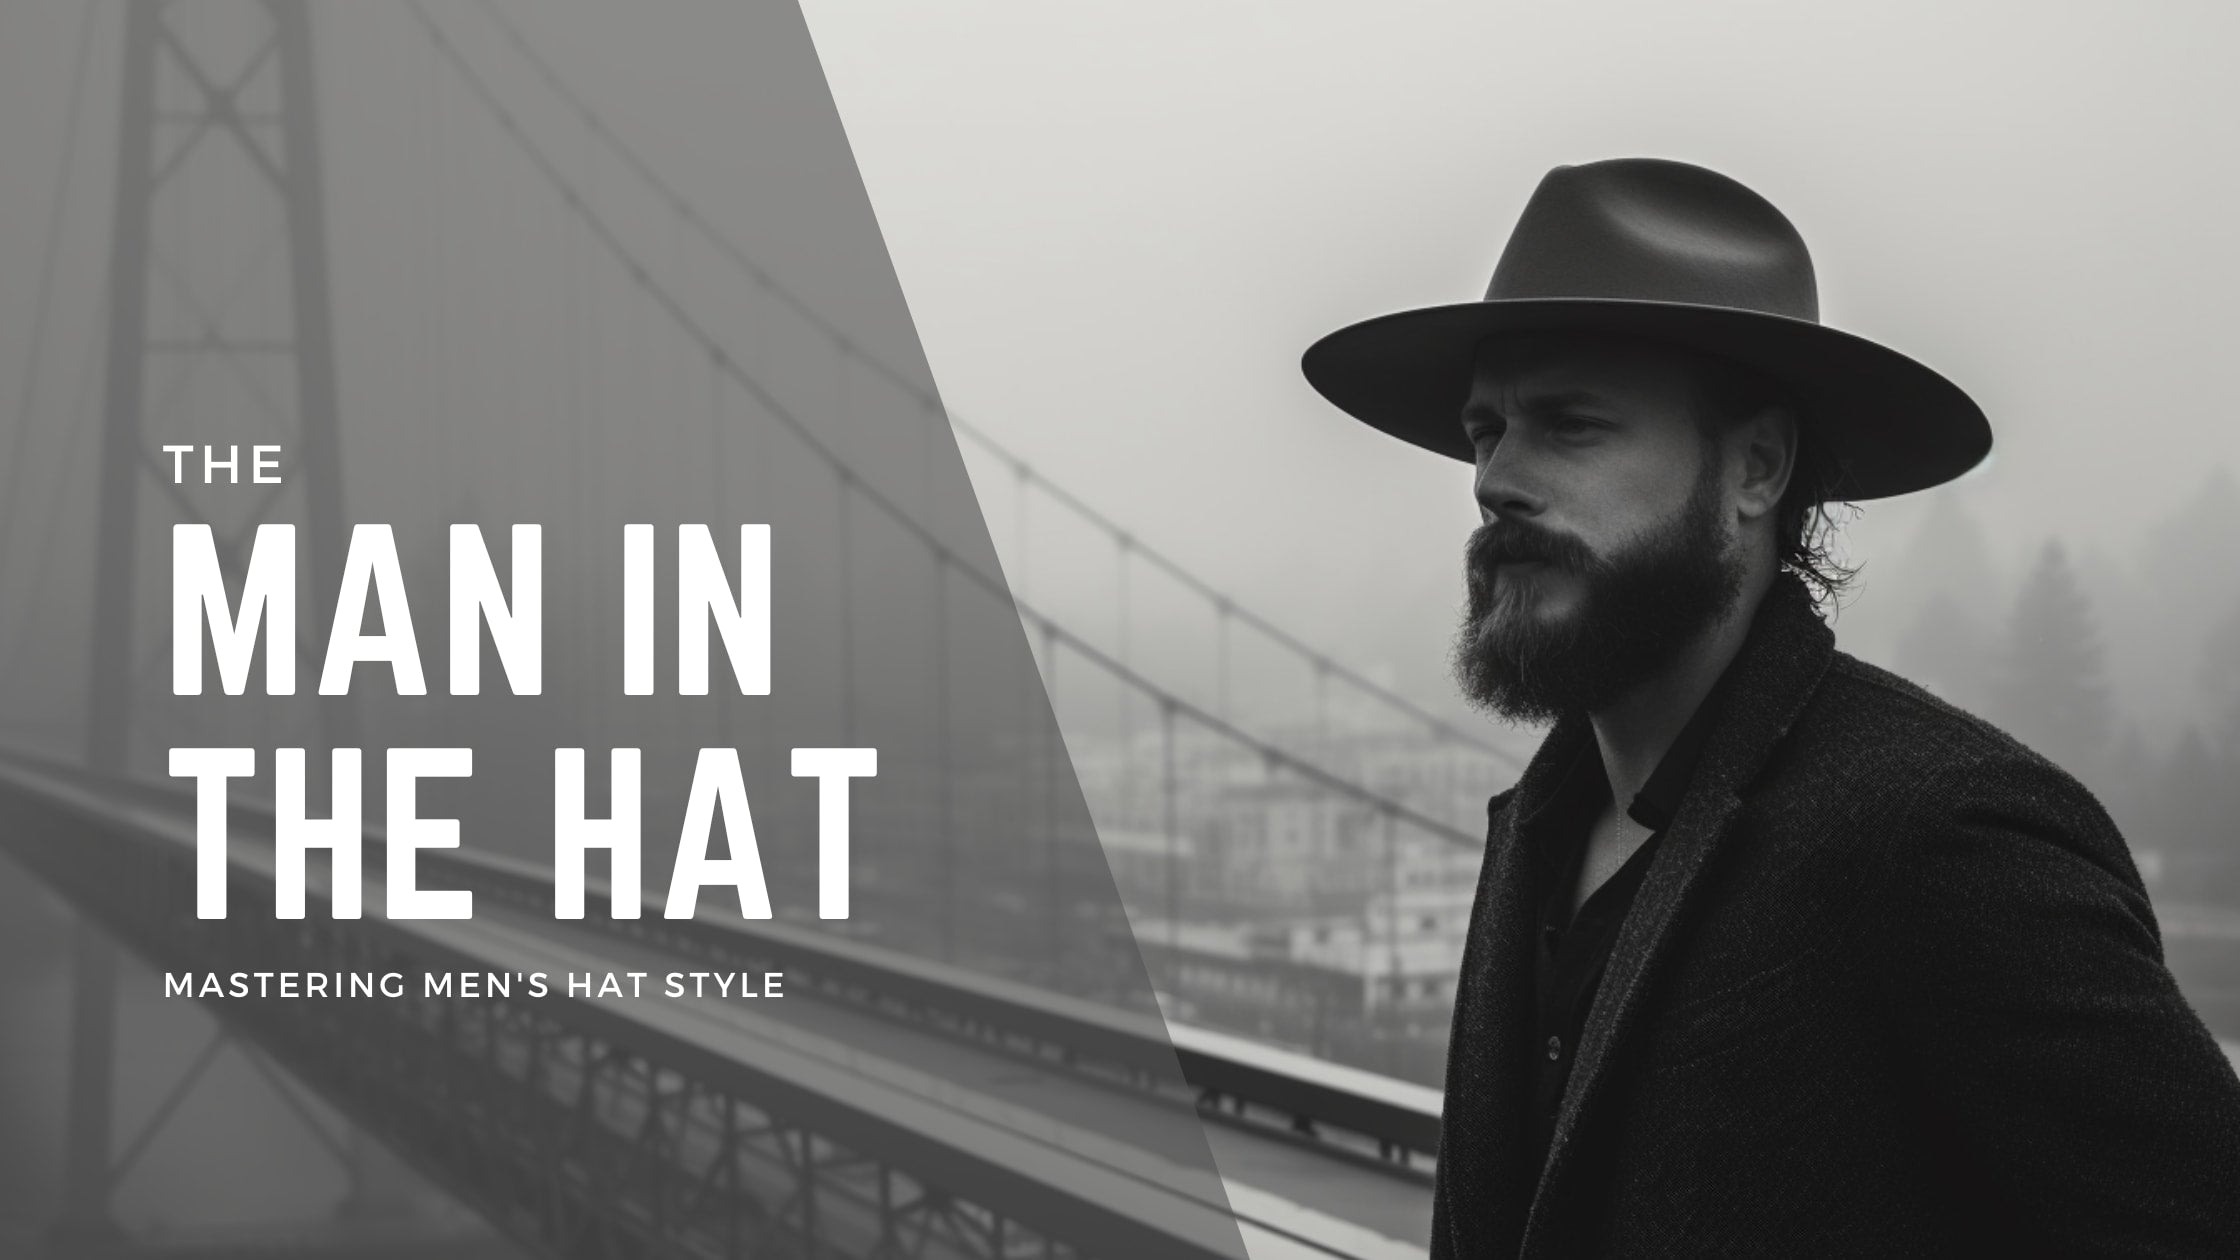 Foto de Elegant and stylish hipster. Retro fashion hat. Man with hat.  Vintage fashion. Man well groomed bearded gentleman on dark background.  Male fashion and menswear. Formal suit classic style outfit do